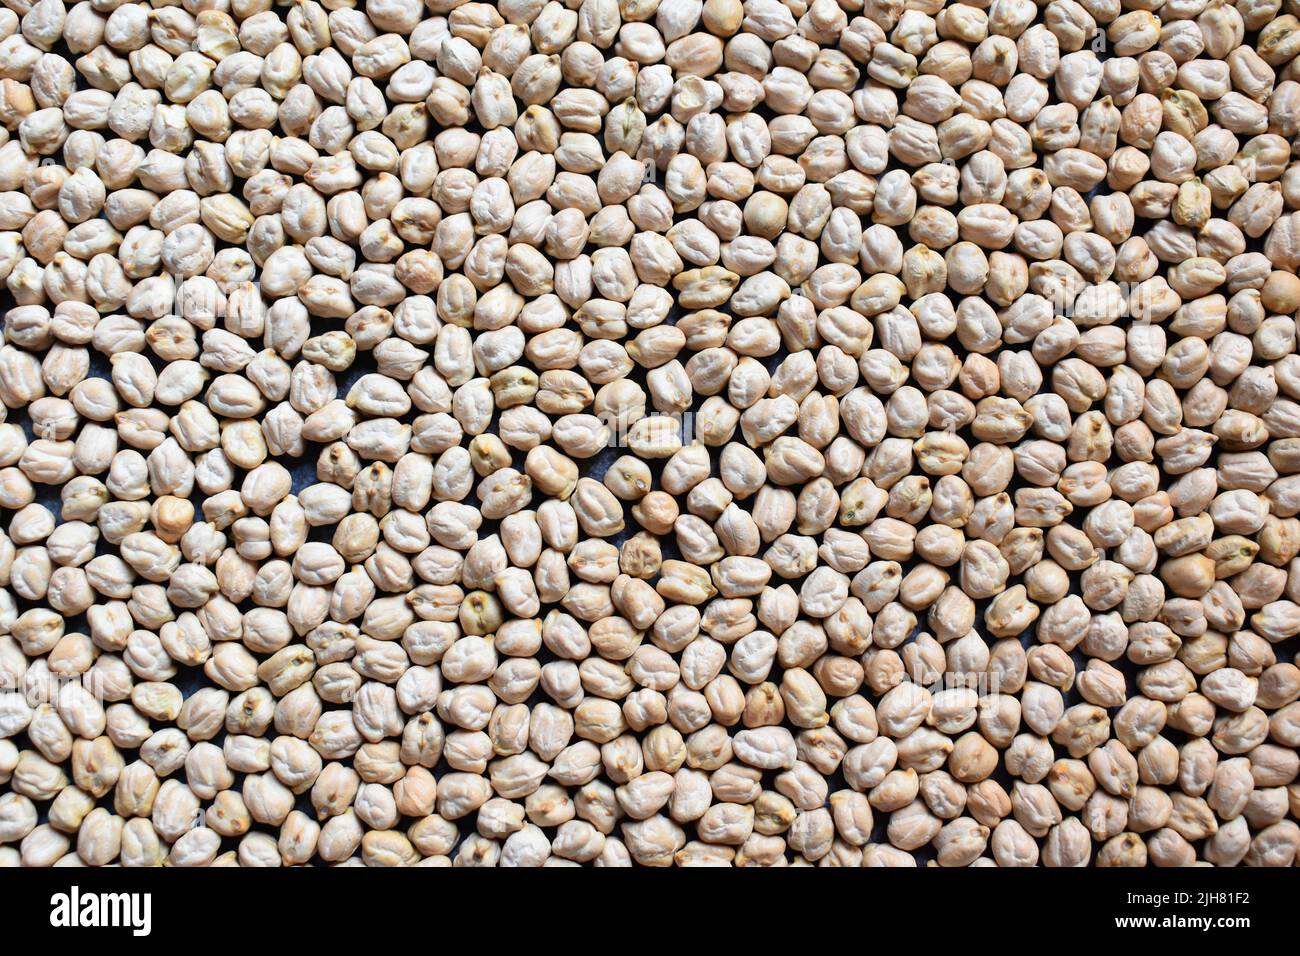 Raw whole dried white Chickpeas Stock Photo